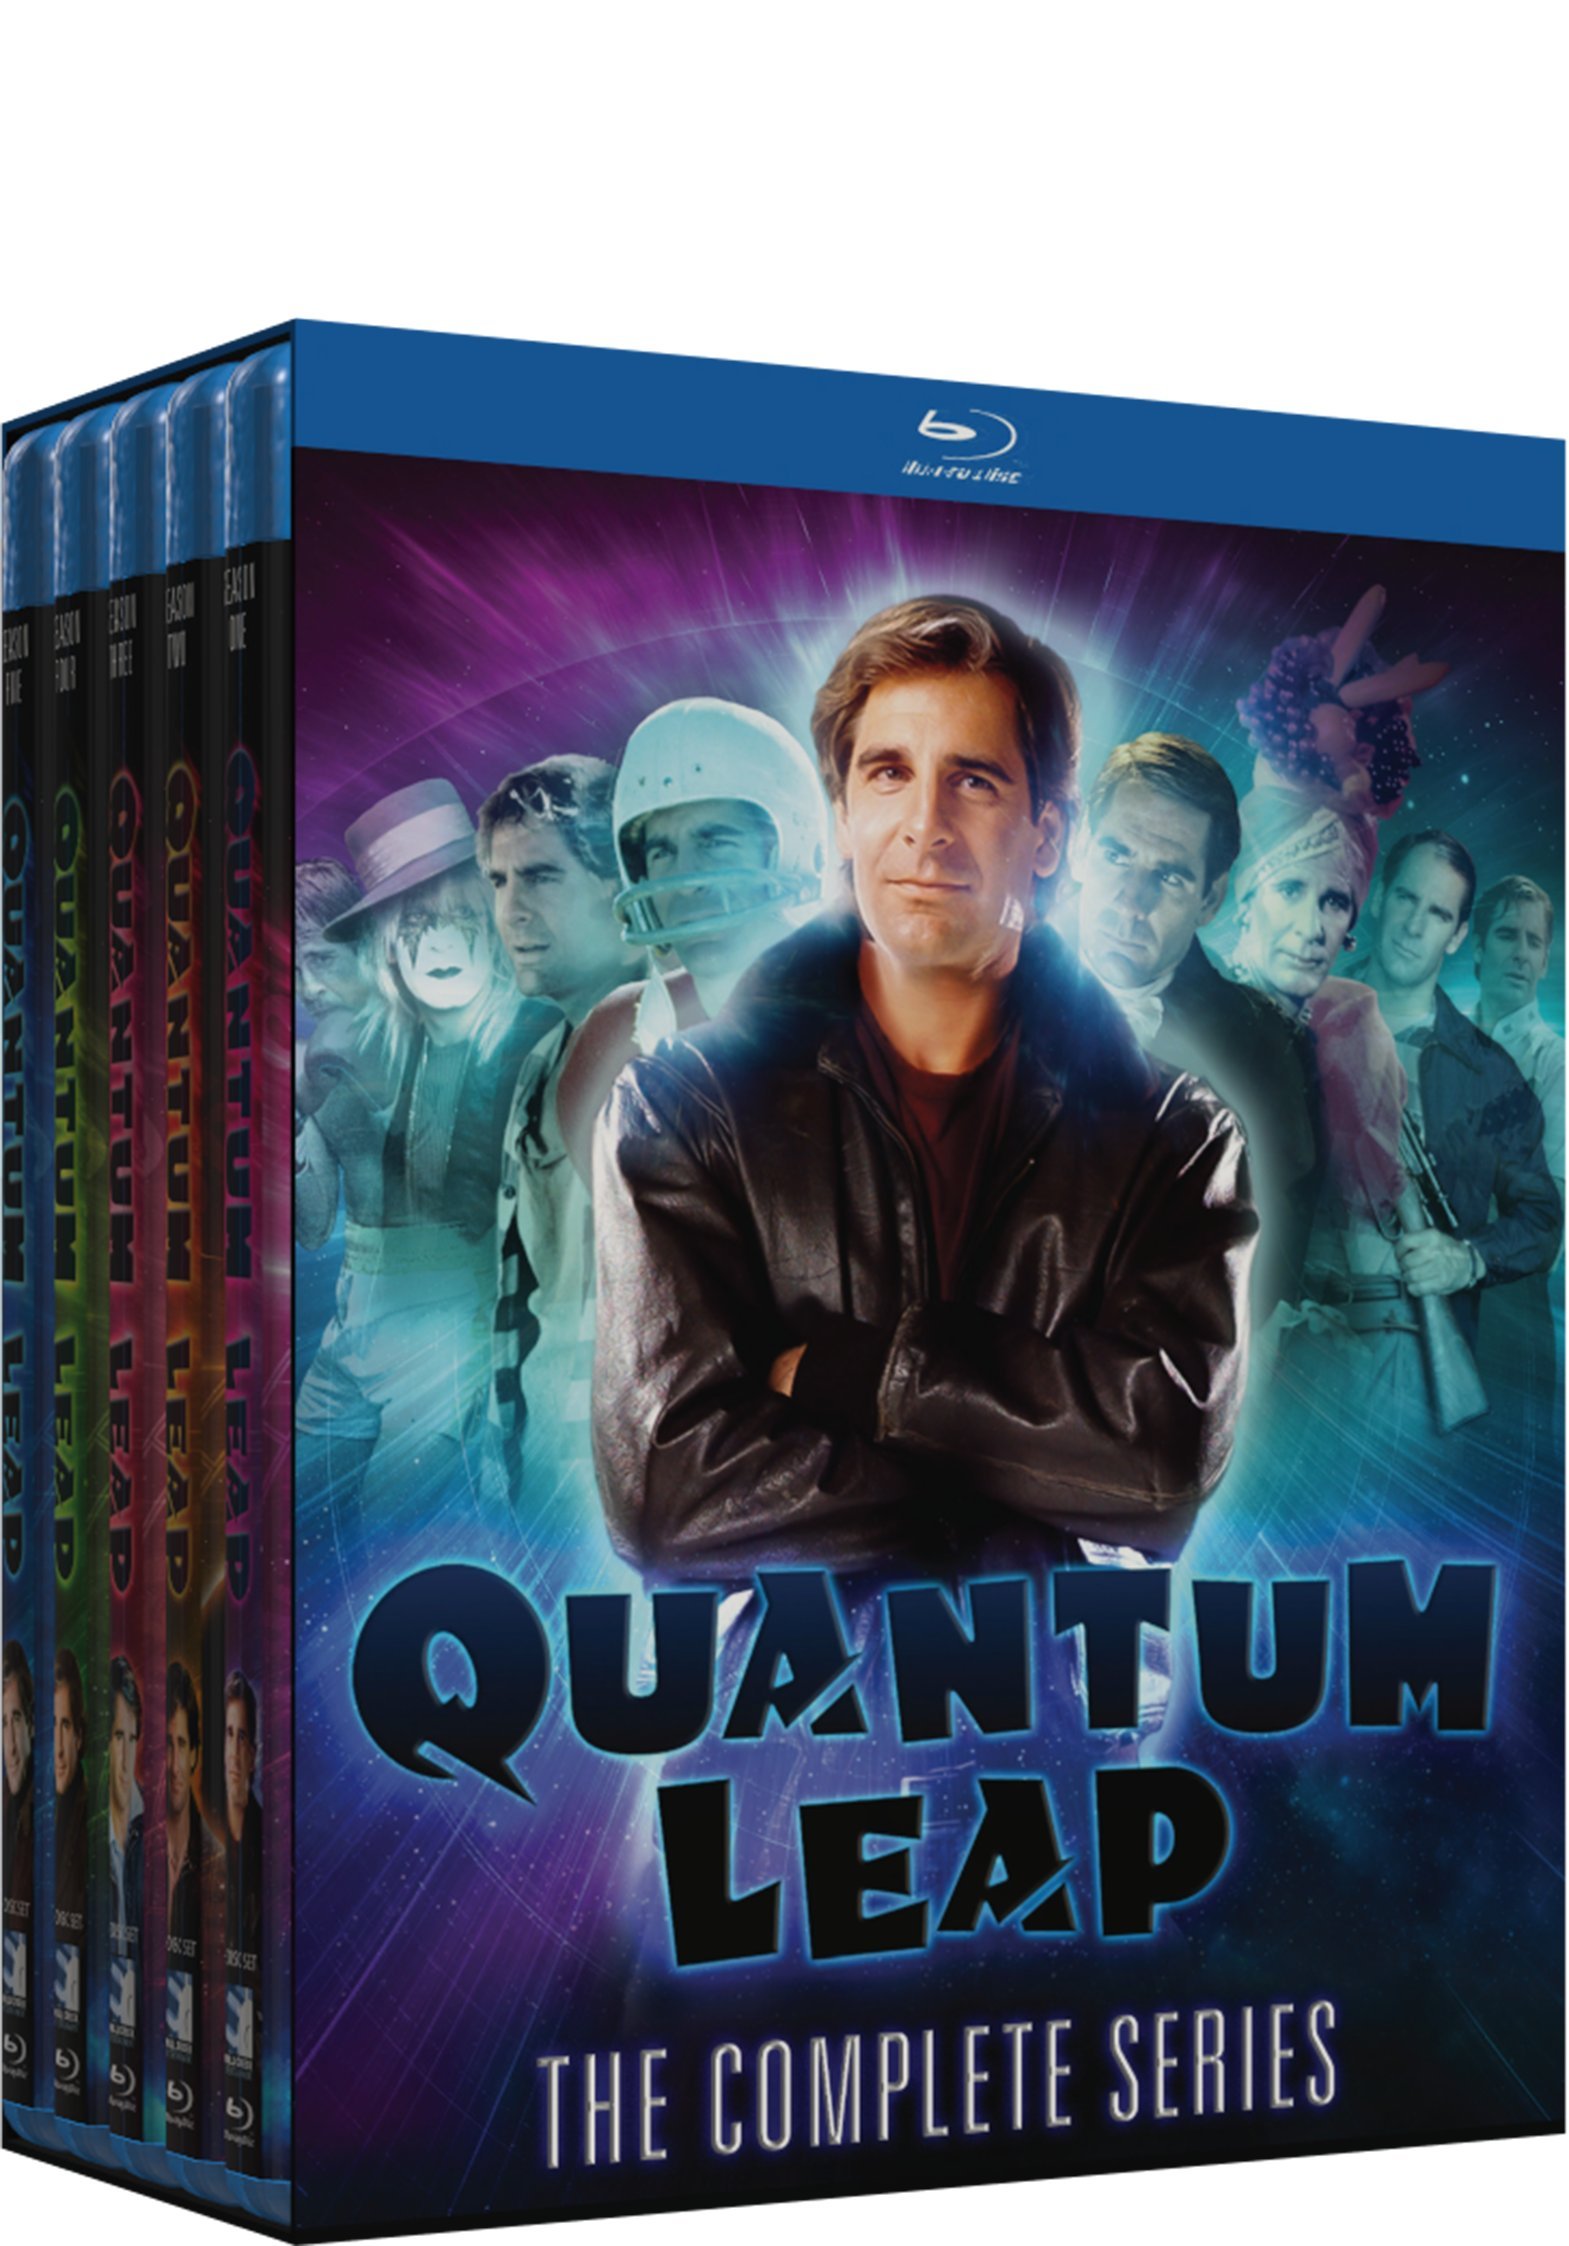 Quantum Leap: The Complete Series (Blu-ray) $29 + Free Shipping